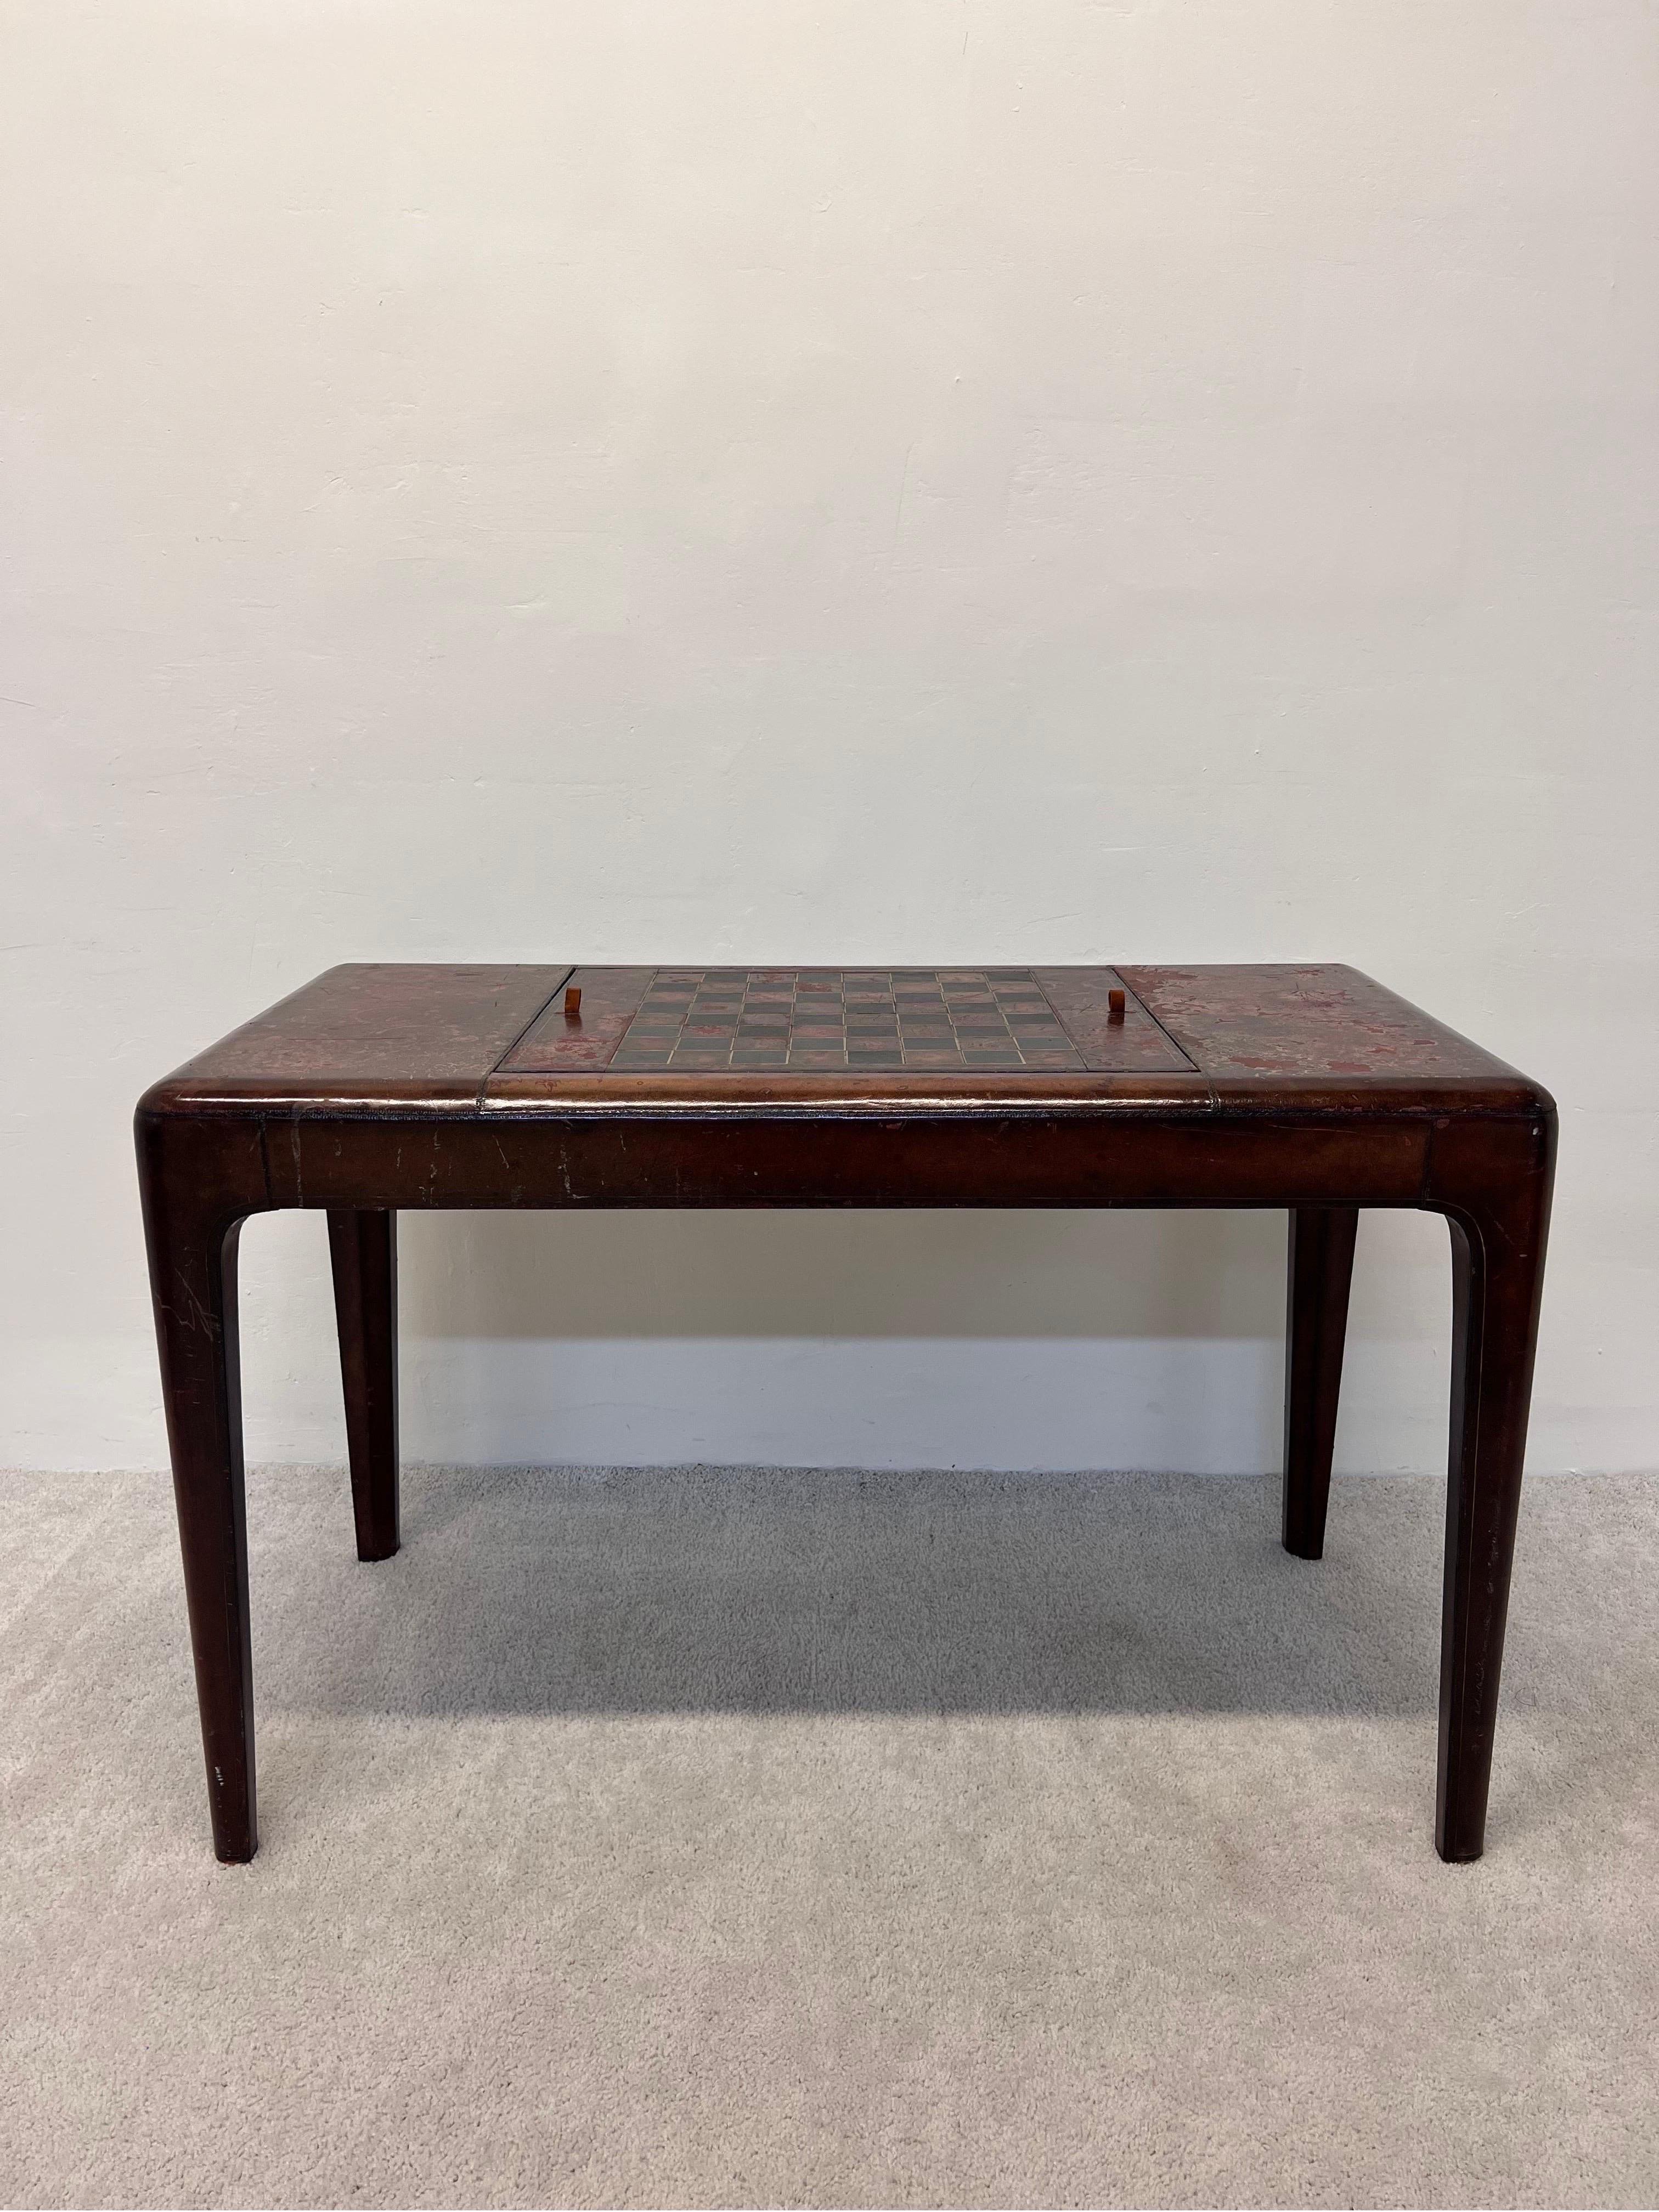 Maitland-Smith distressed leather game table with both chess/checkers and Backgammon reversible board. Leather wrapped table has two side drawers on the side for game pieces and card storage. Game pieces not included. Opening height for chairs: